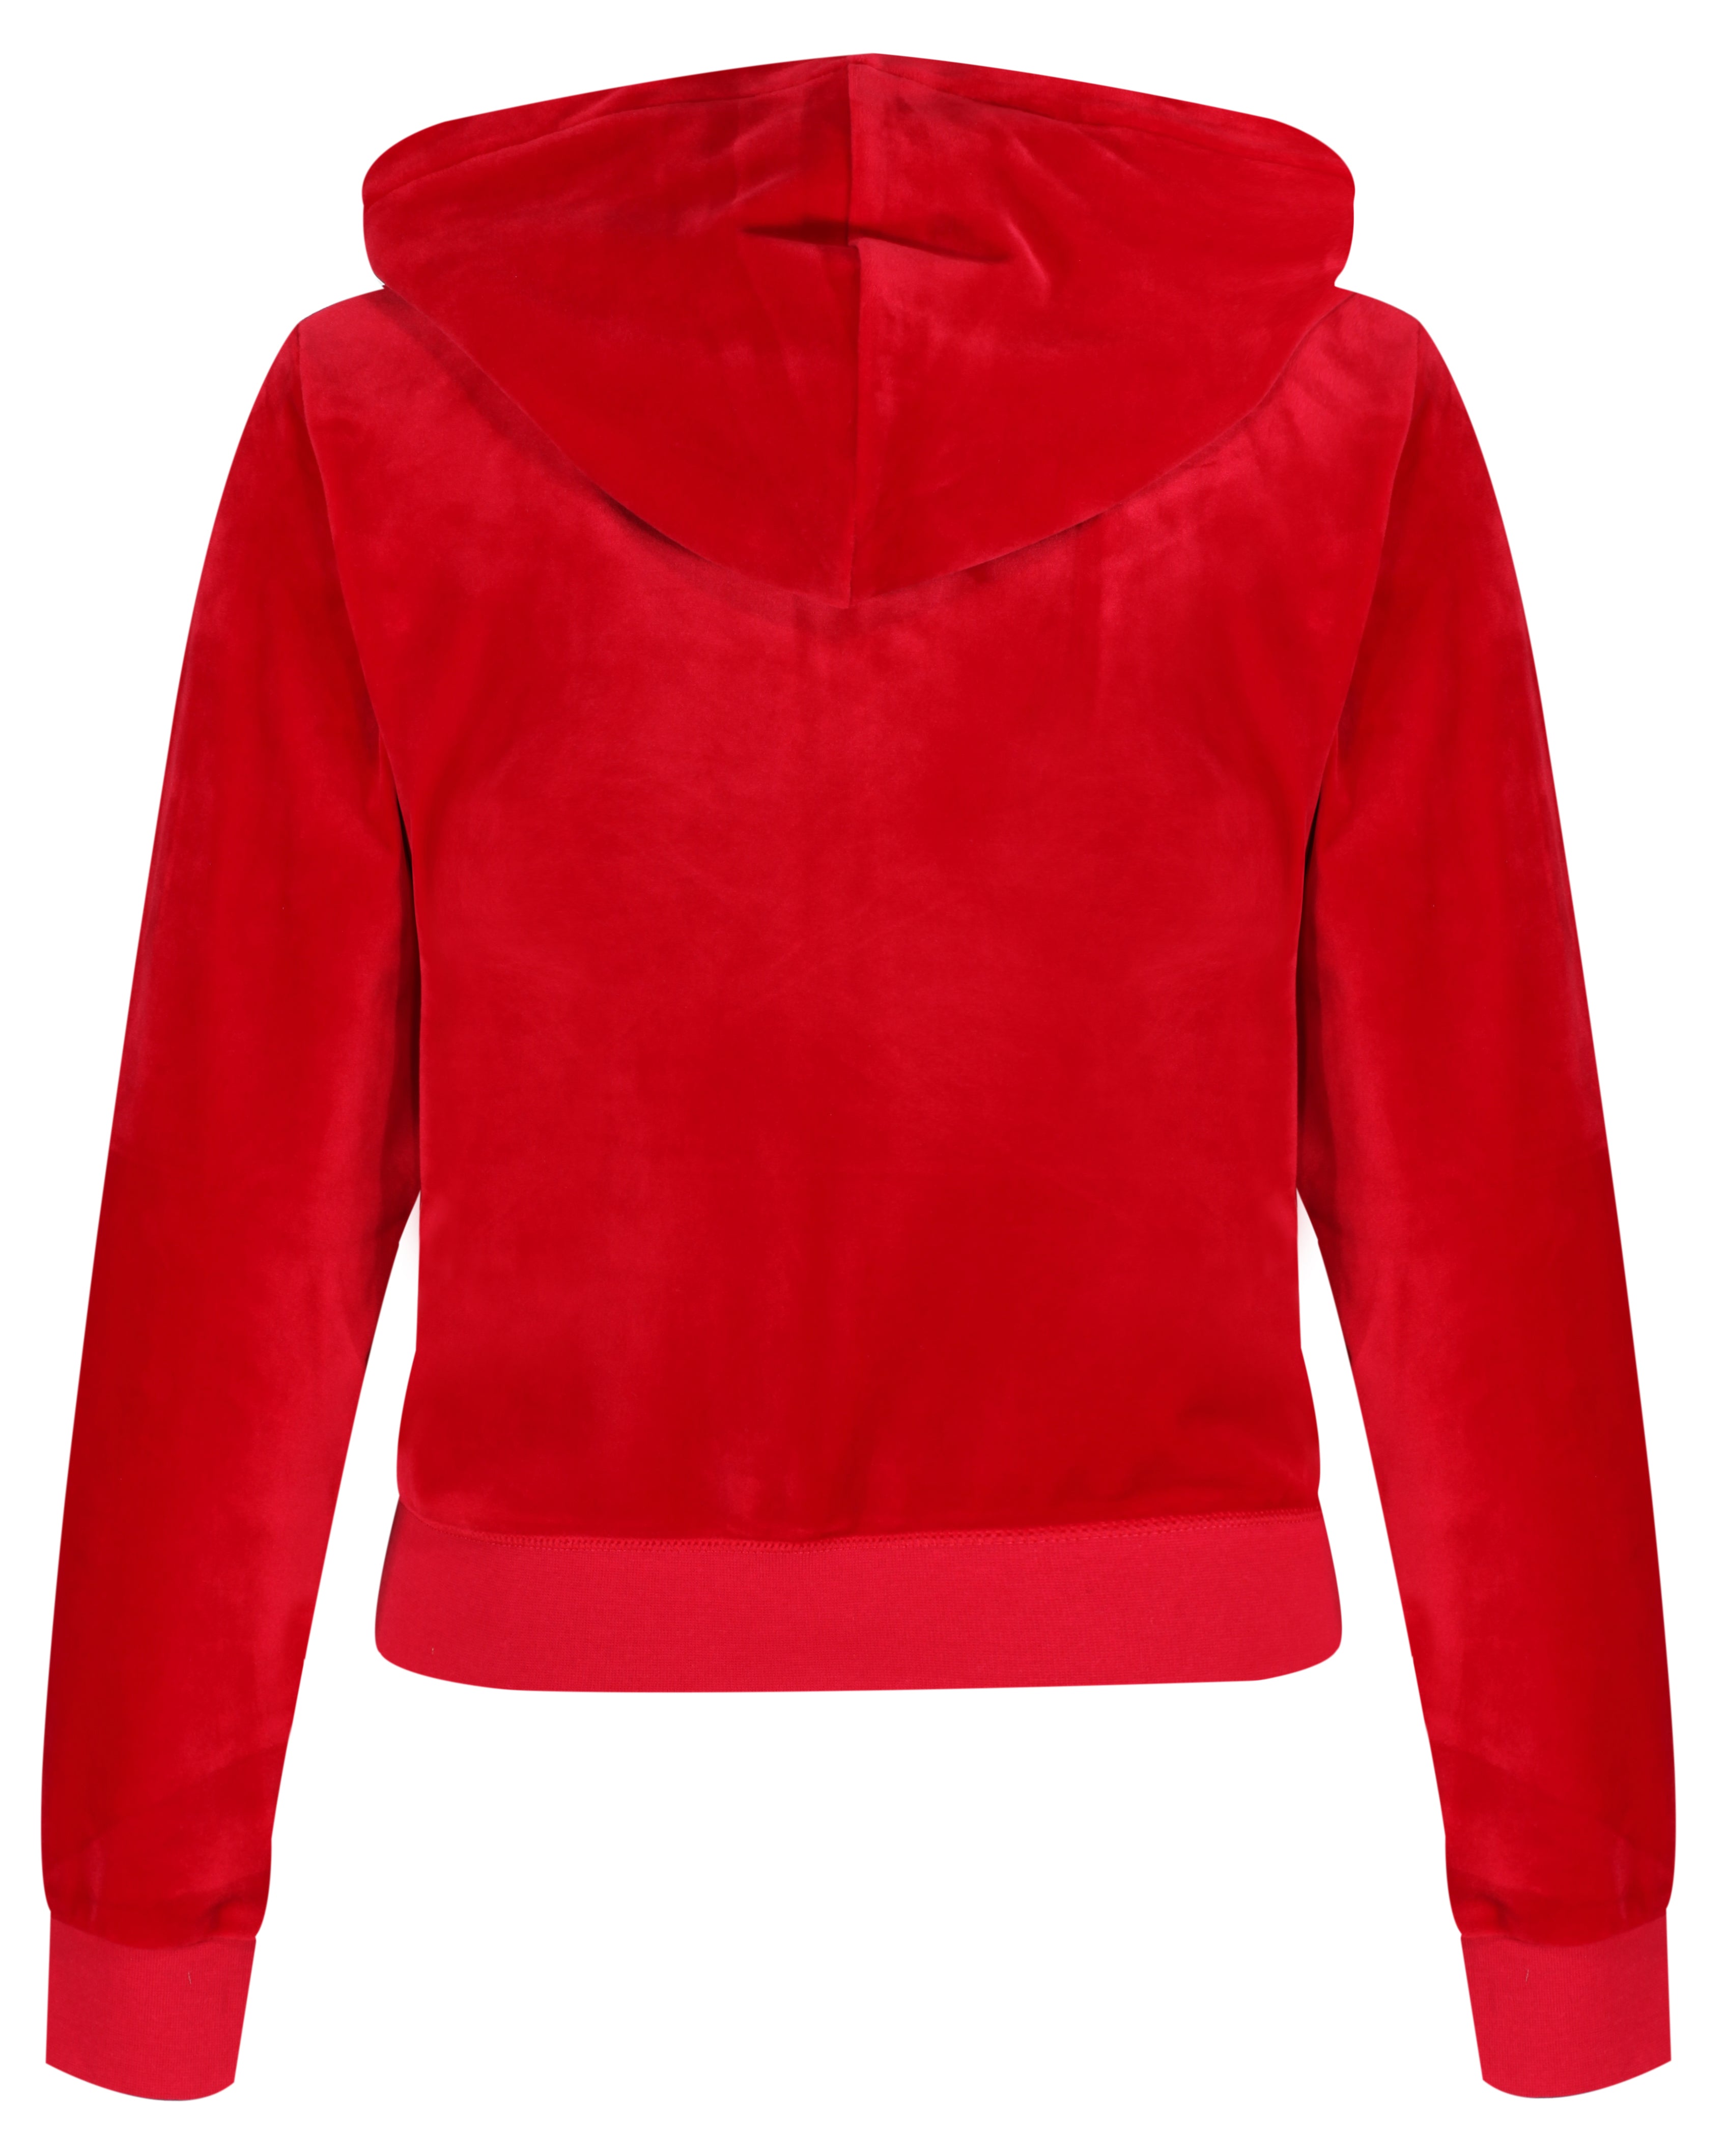 Robertson Classic Velour Zip Hoodie - Astor Red - Juicy Couture - Gensere - VILLOID.no